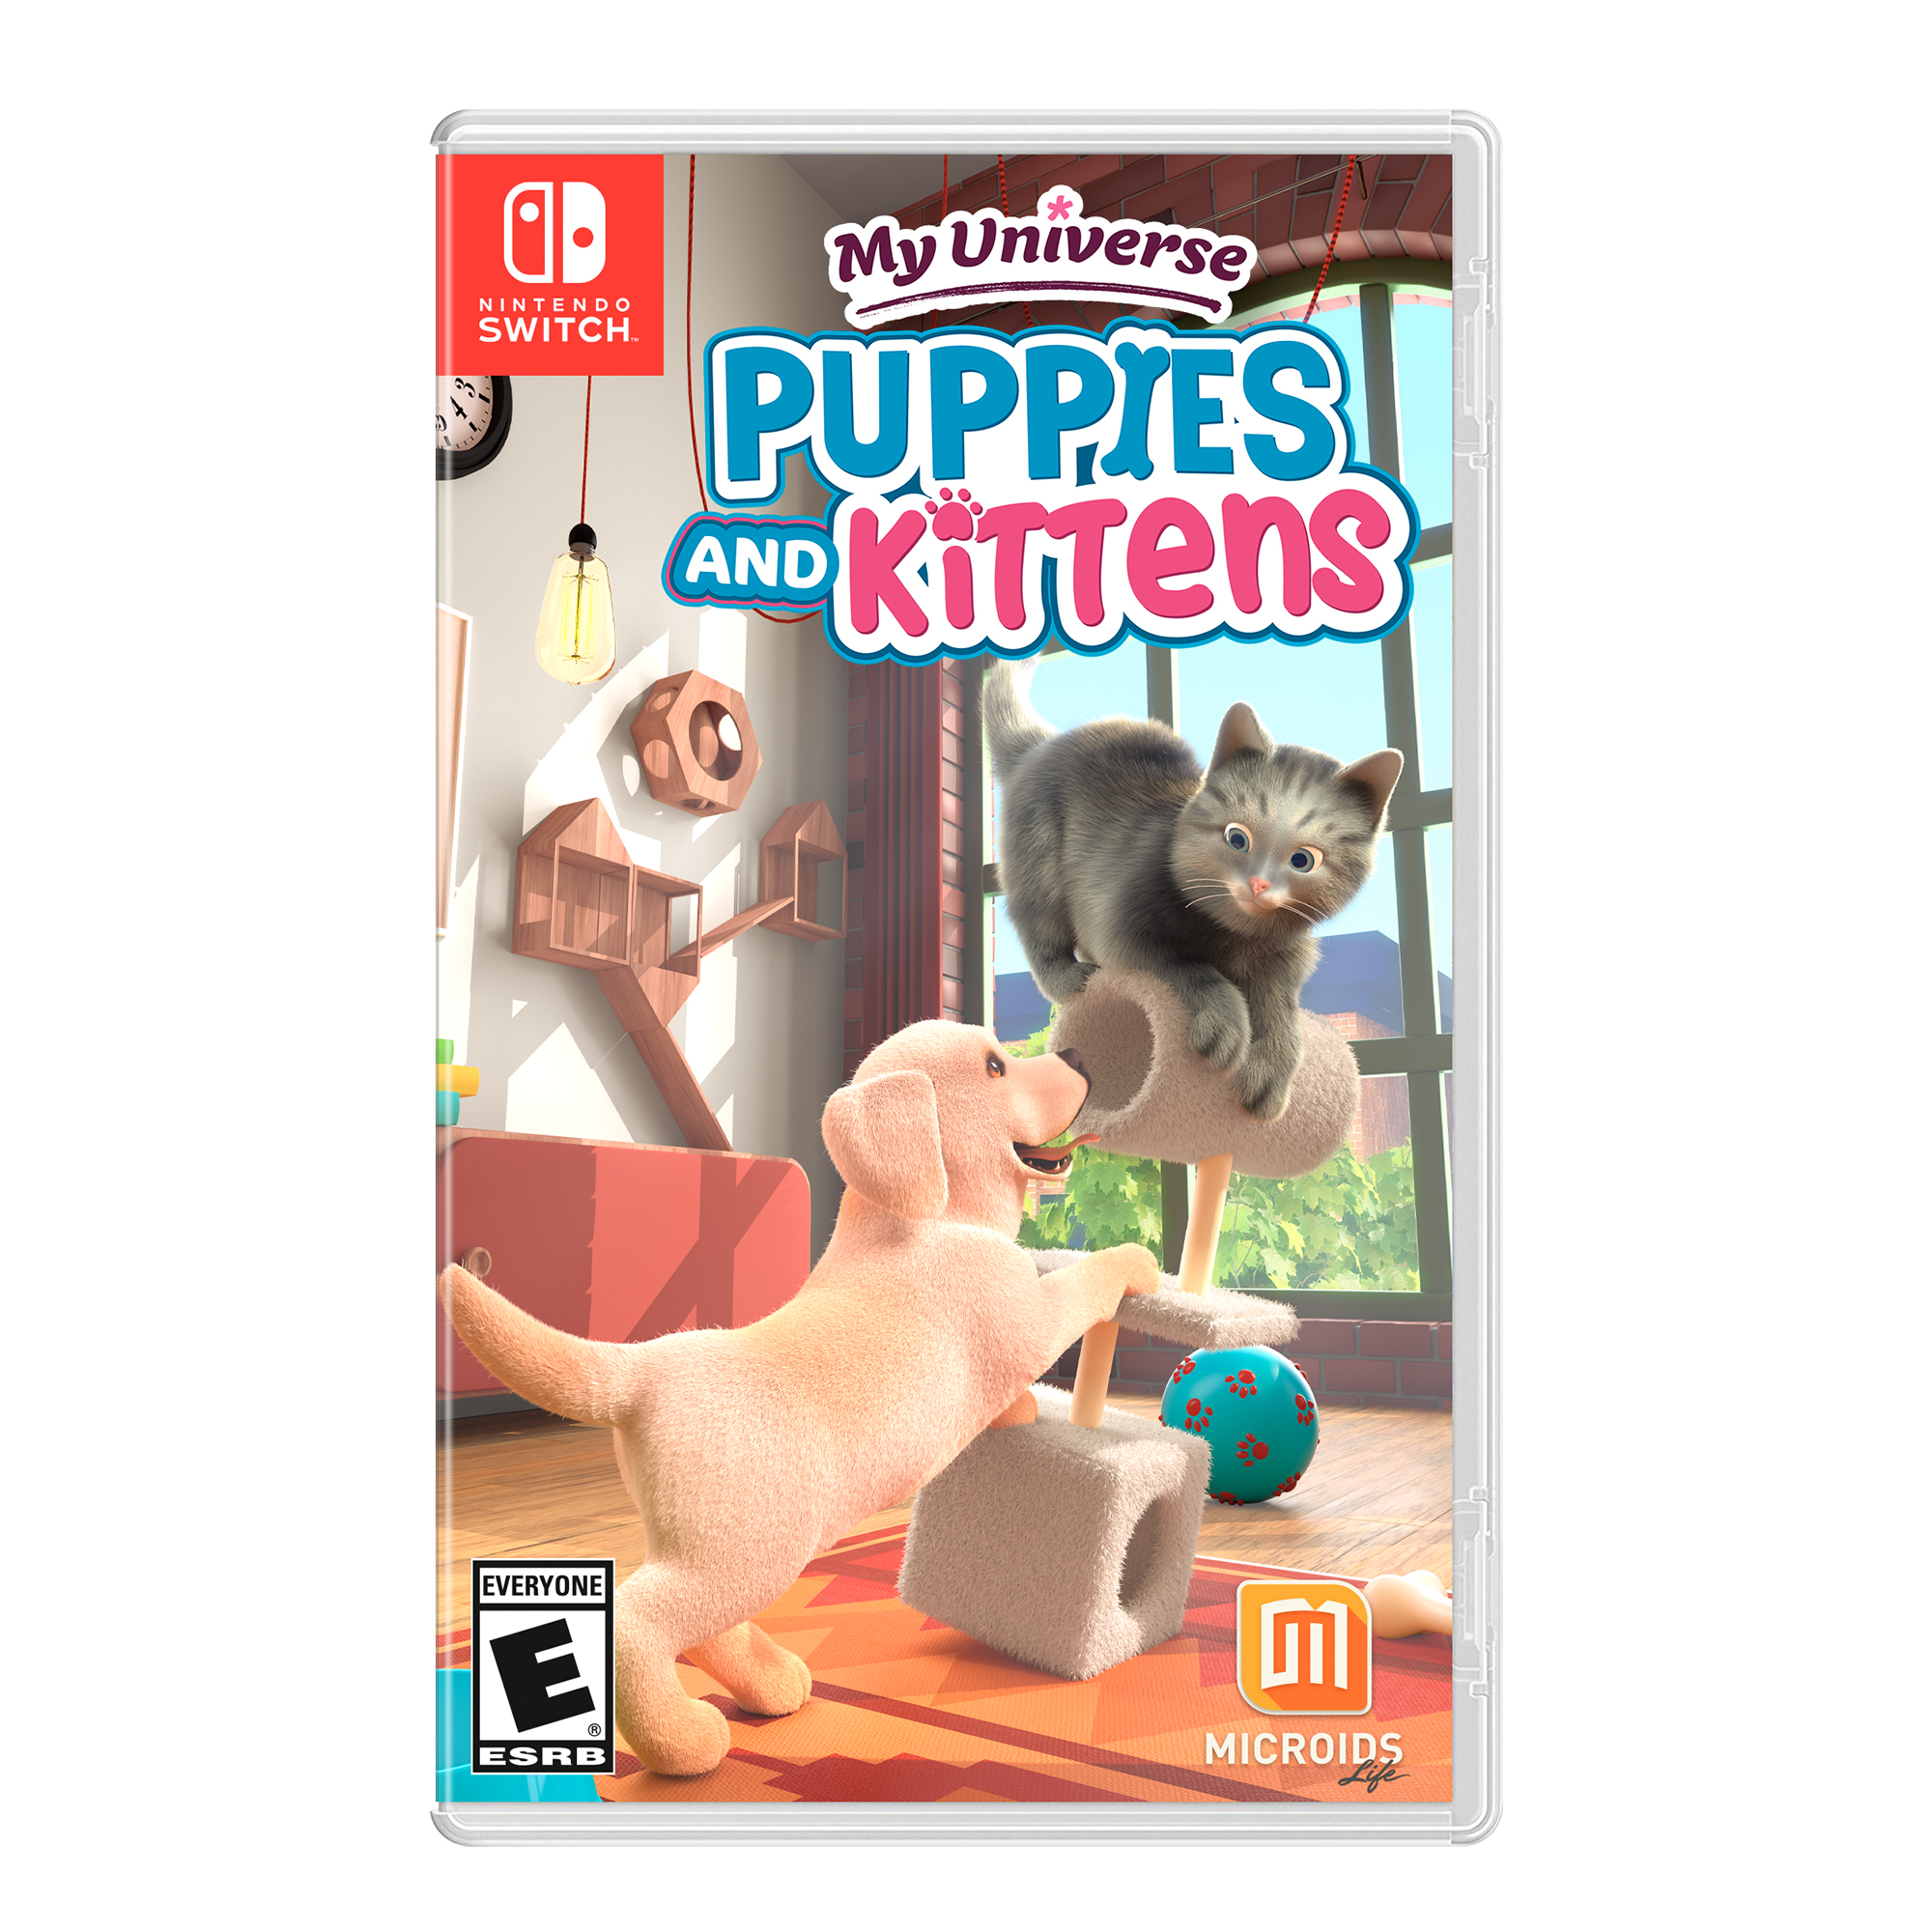 My Universe: Puppies and Kittens, Maximum Games, Nintendo Switch